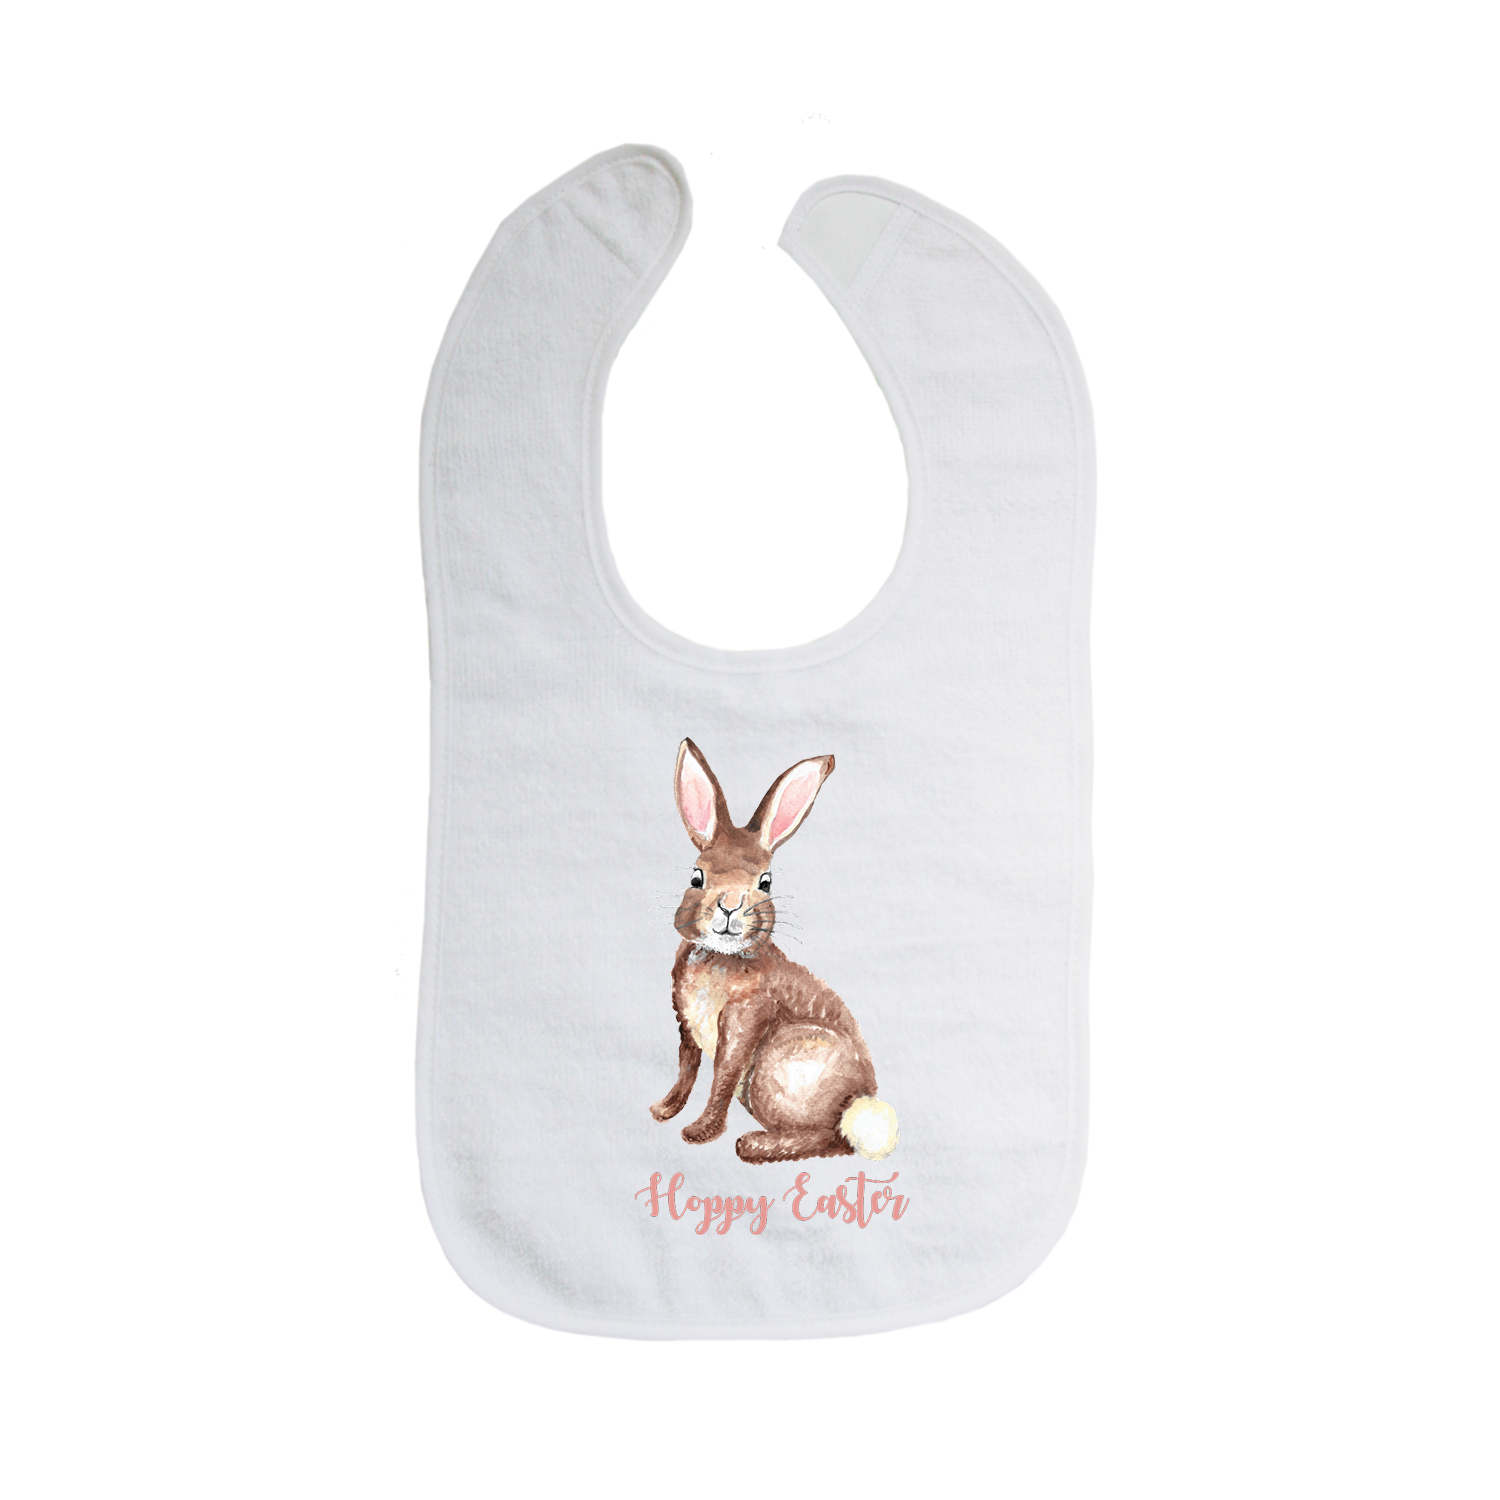 brown bunny with hoppy easter bib